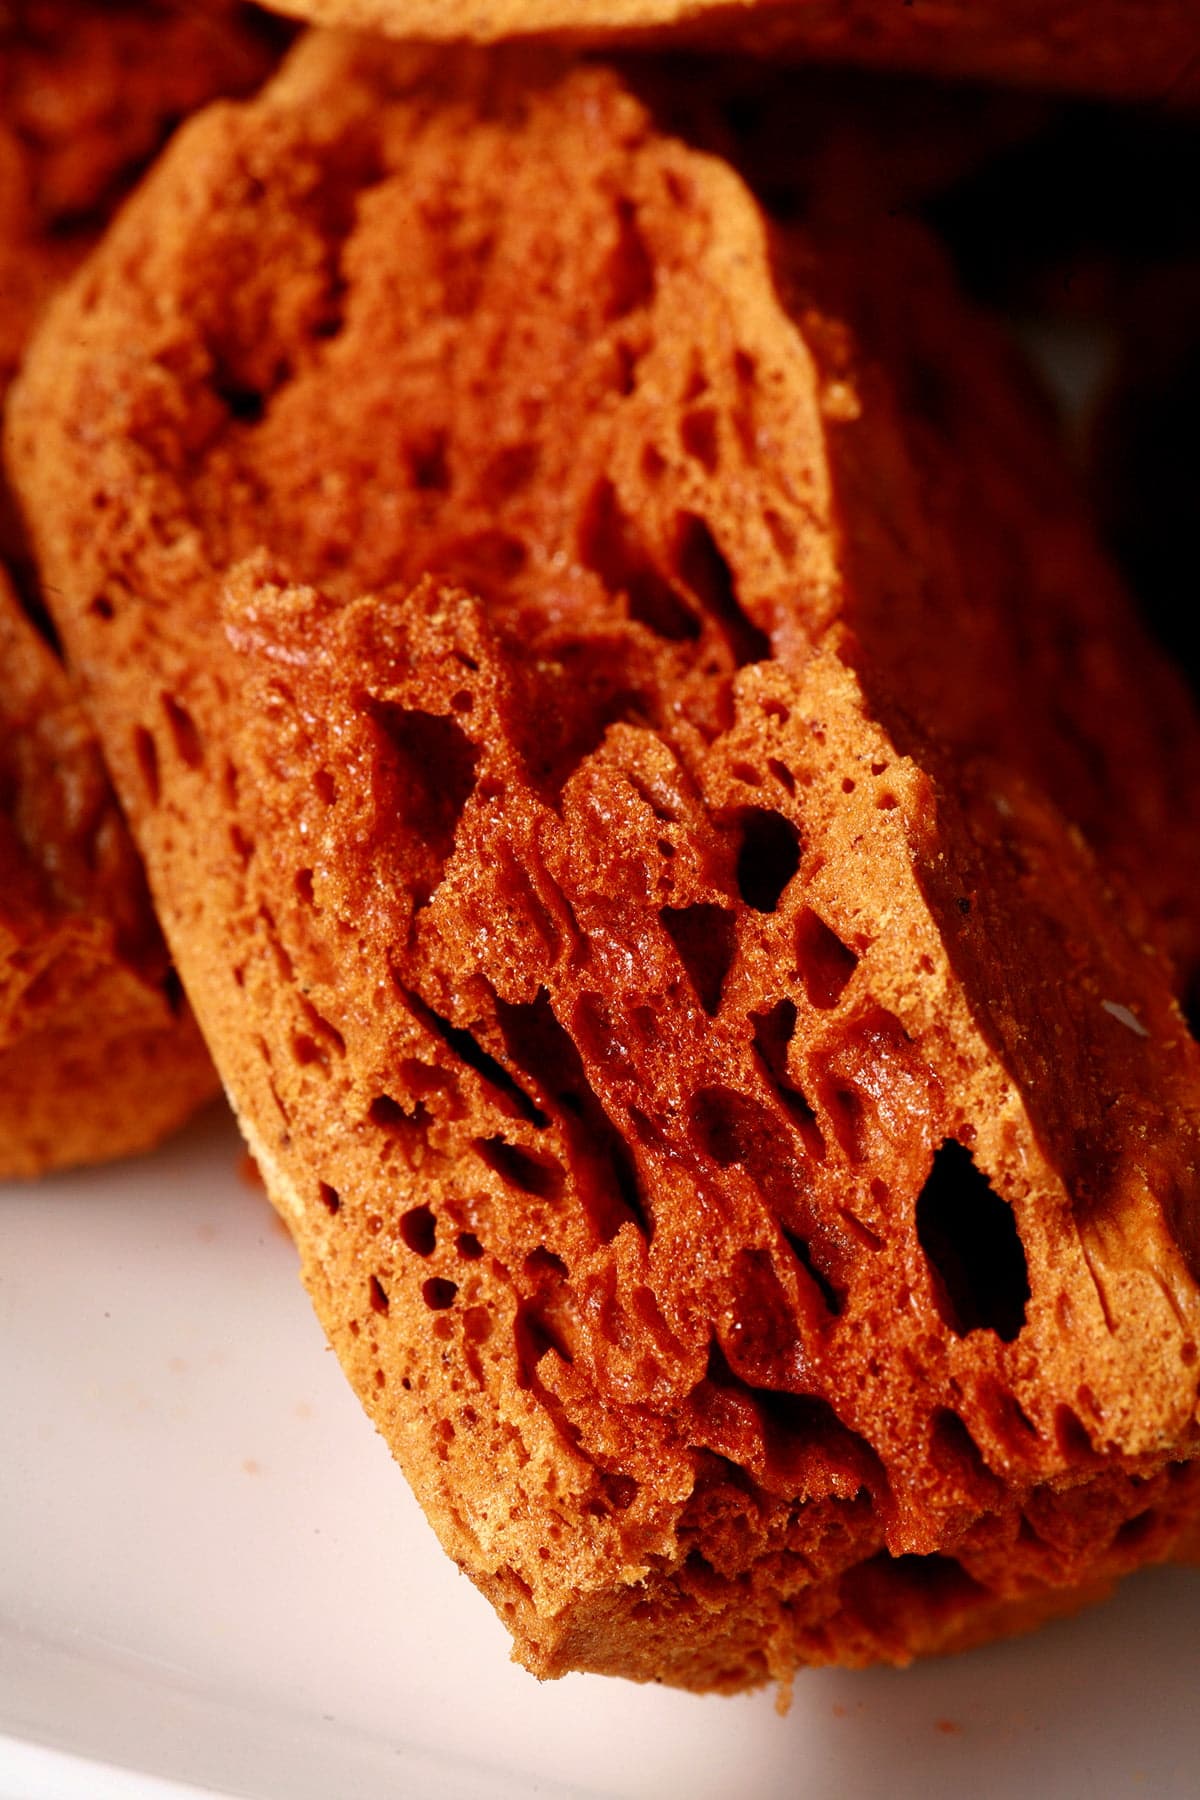 Chunks of deep amber coloured ginger-molasses sponge toffee are piled on a small white plate.